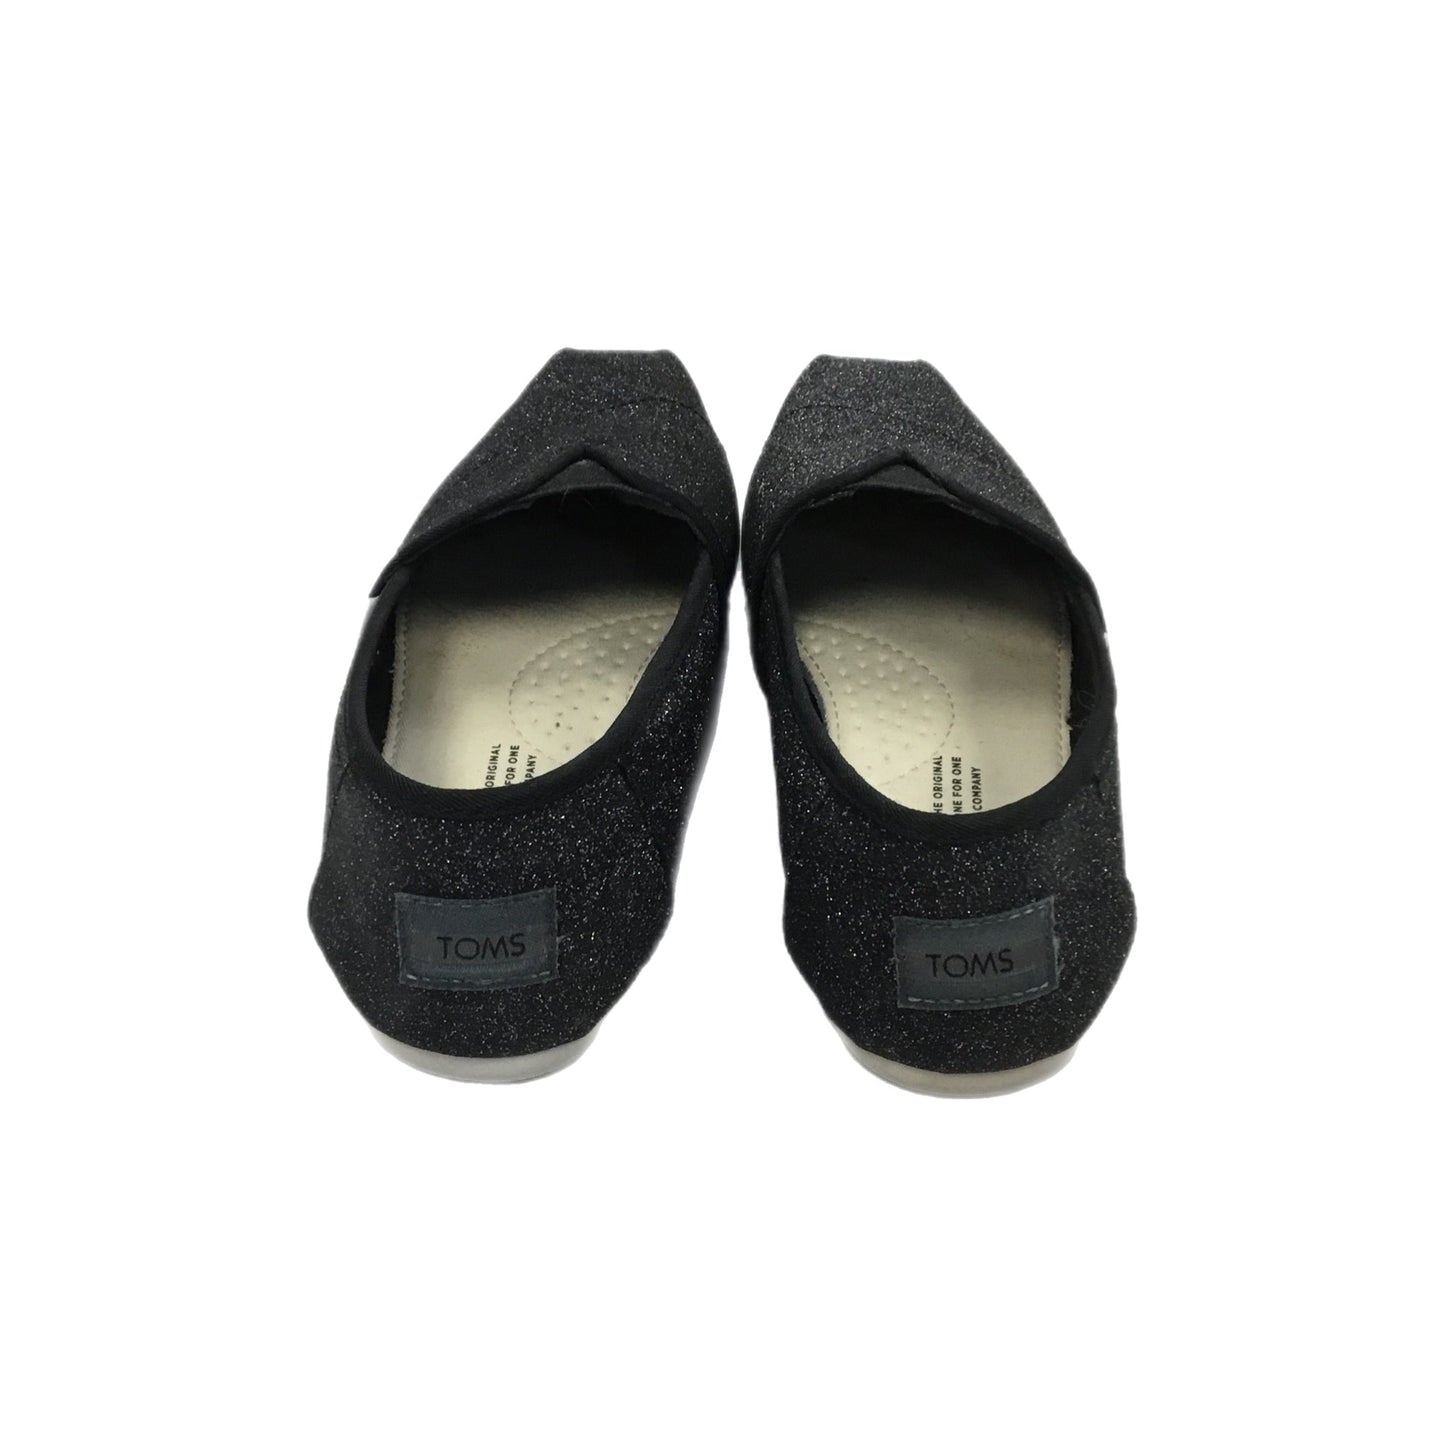 Shoes Flats Loafer Oxford By Toms  Size: 6